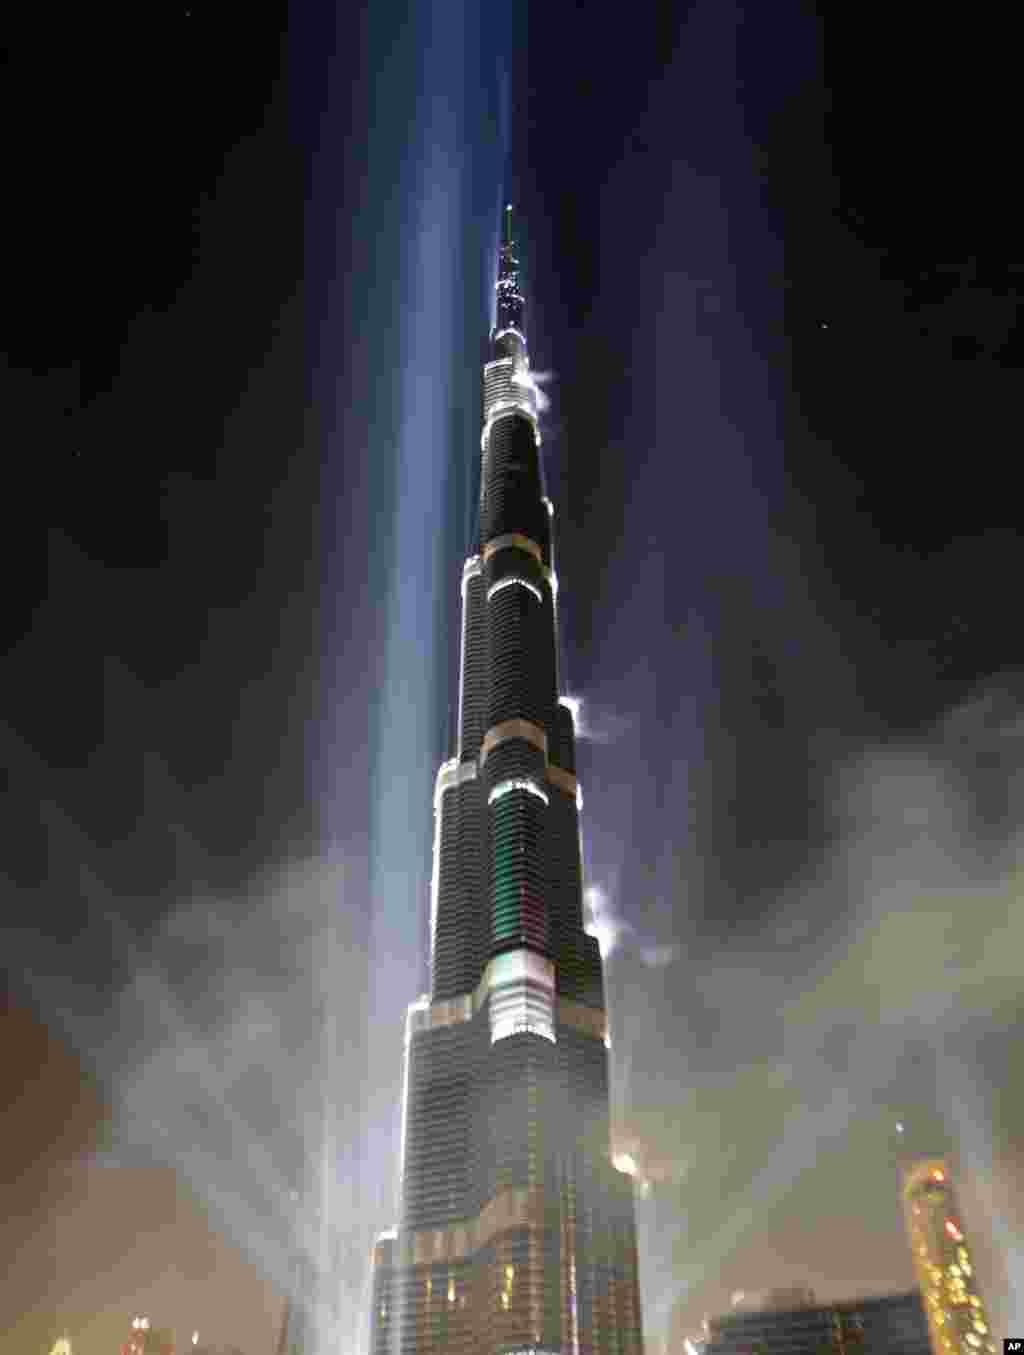 The Burj Khalifa in Dubai, United Arab Emirates, is the tallest completed building in the world and measures 828.14 meters. 